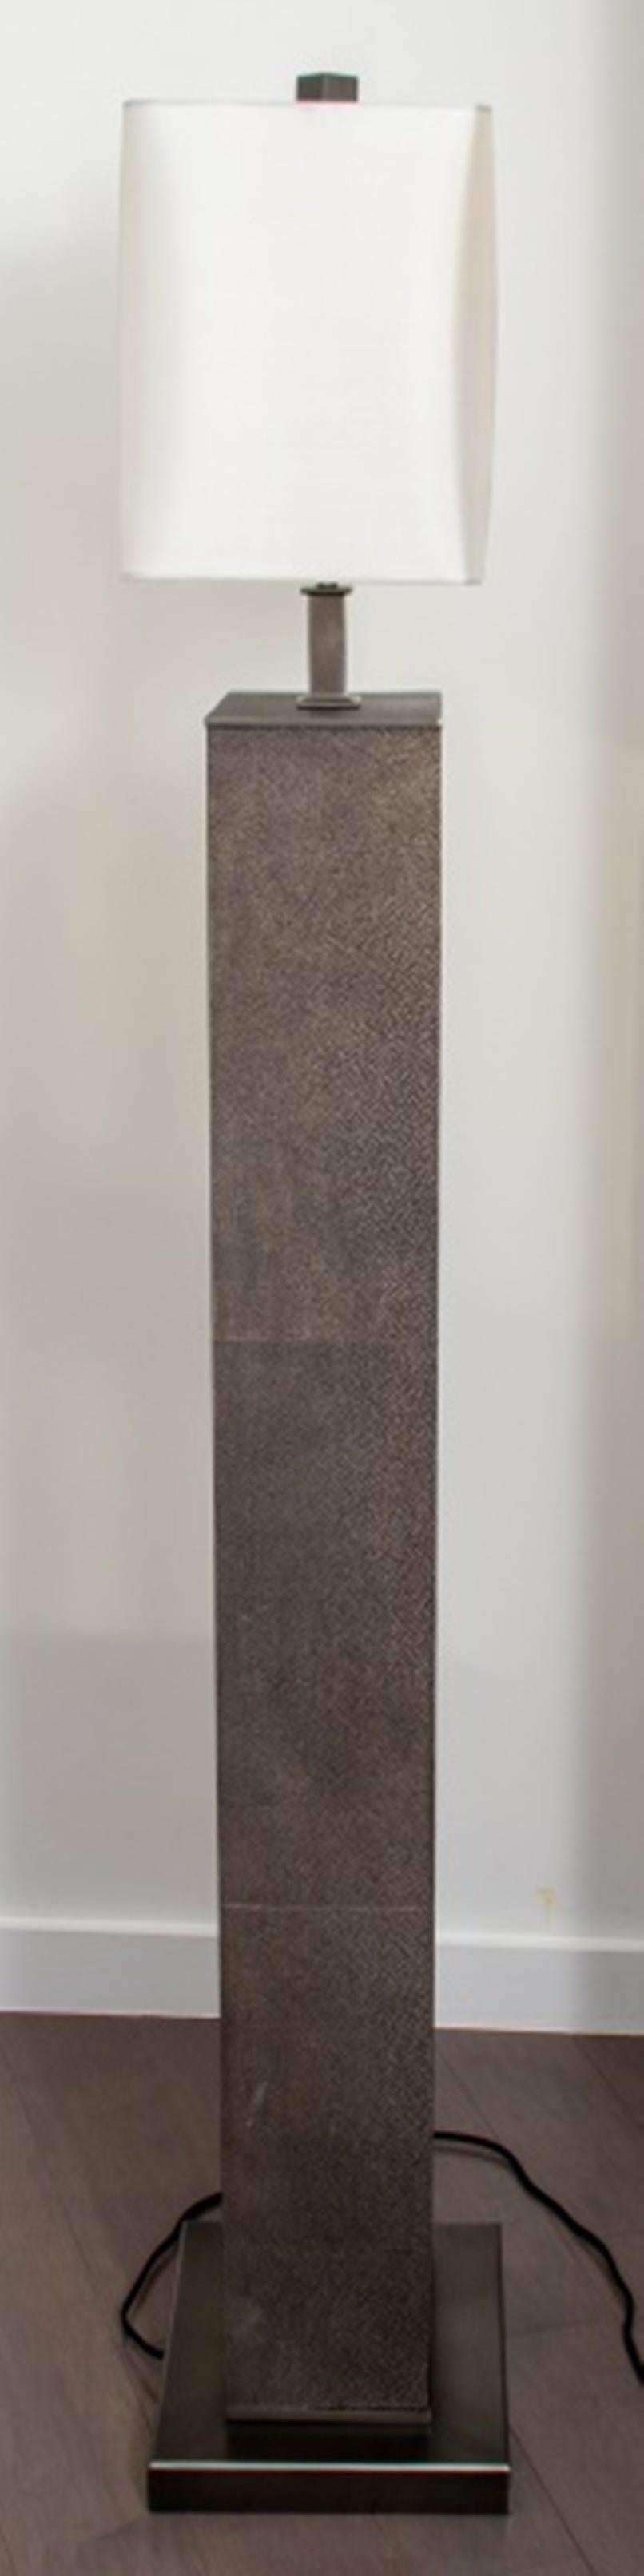 Christian Liaigre style Art Deco Revival shagreen standing floor lamp, tall and rectangular, the sides veneered in faux caviar gray shagreen, on a rectangular antiqued nickel base, with conforming shade. 67